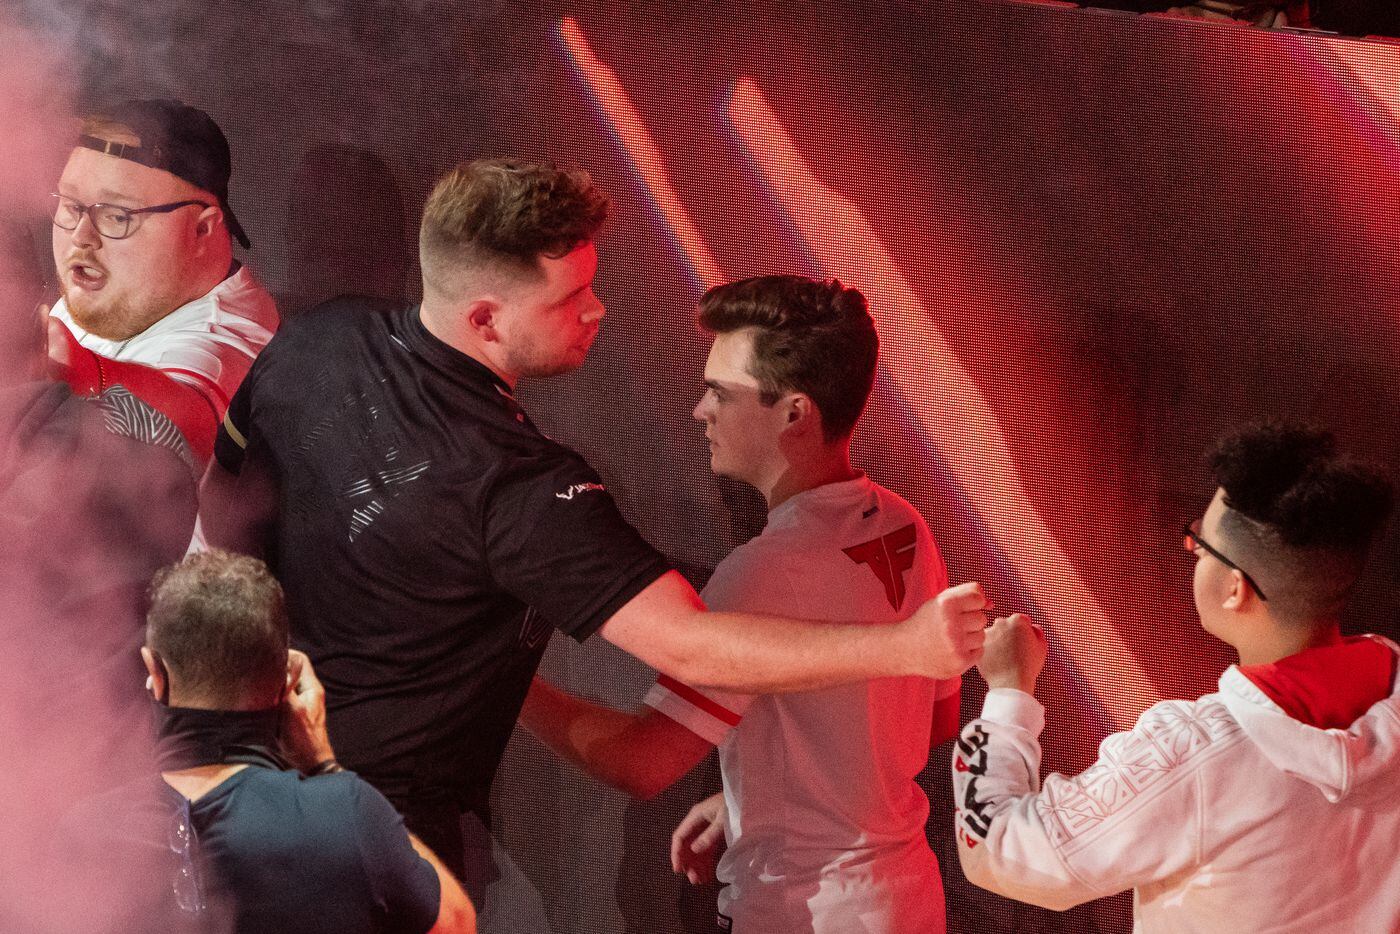 The Dallas Empire exchange fist bumps with the Atlanta FaZe after the winners final of the Call of Duty league playoffs at the Galen Center on Saturday, August 21, 2021 in Los Angeles, California. The Empire lost to FaZe 0 - 3 in their first match of the day but are still in contention to play in the finals through the elimination finals. (Justin L. Stewart/Special Contributor)